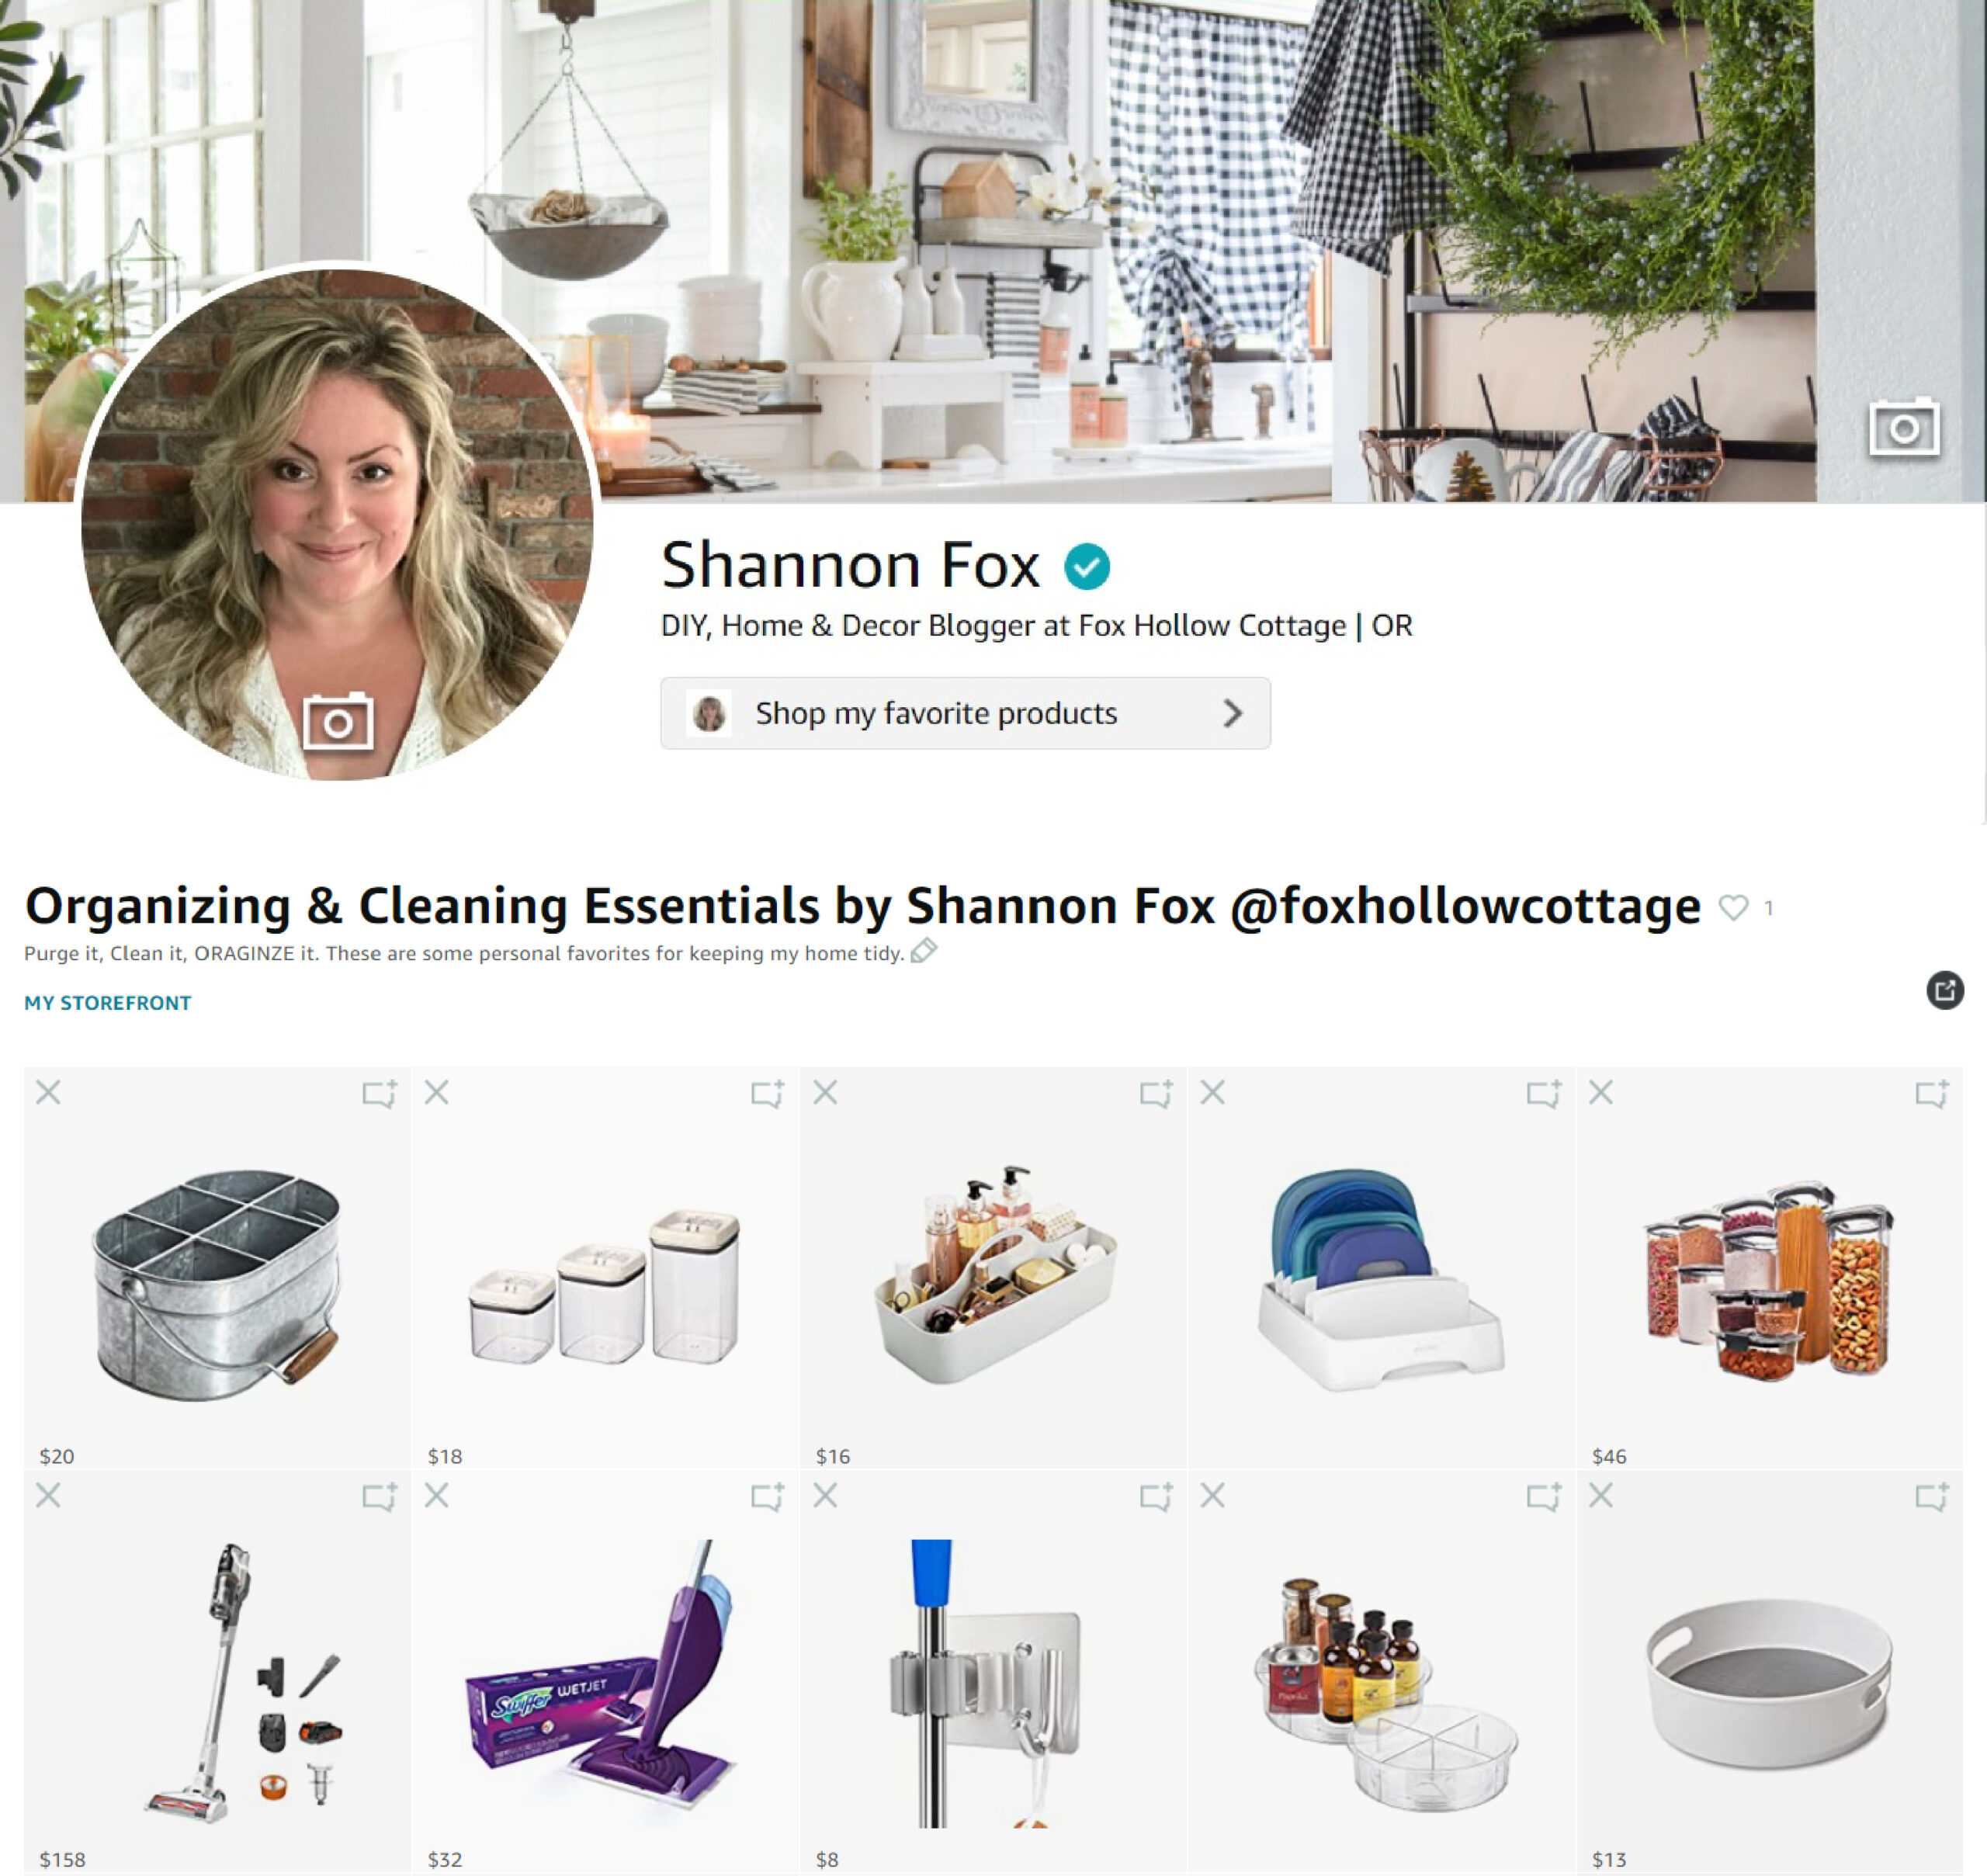 https://foxhollowcottage.com/wp-content/uploads/2021/01/Shop-With-Me-favortie-cleaning-and-organizing-picks-on-Amazon-www.foxhollowcottage.com-Shannon-Fox-scaled.jpg